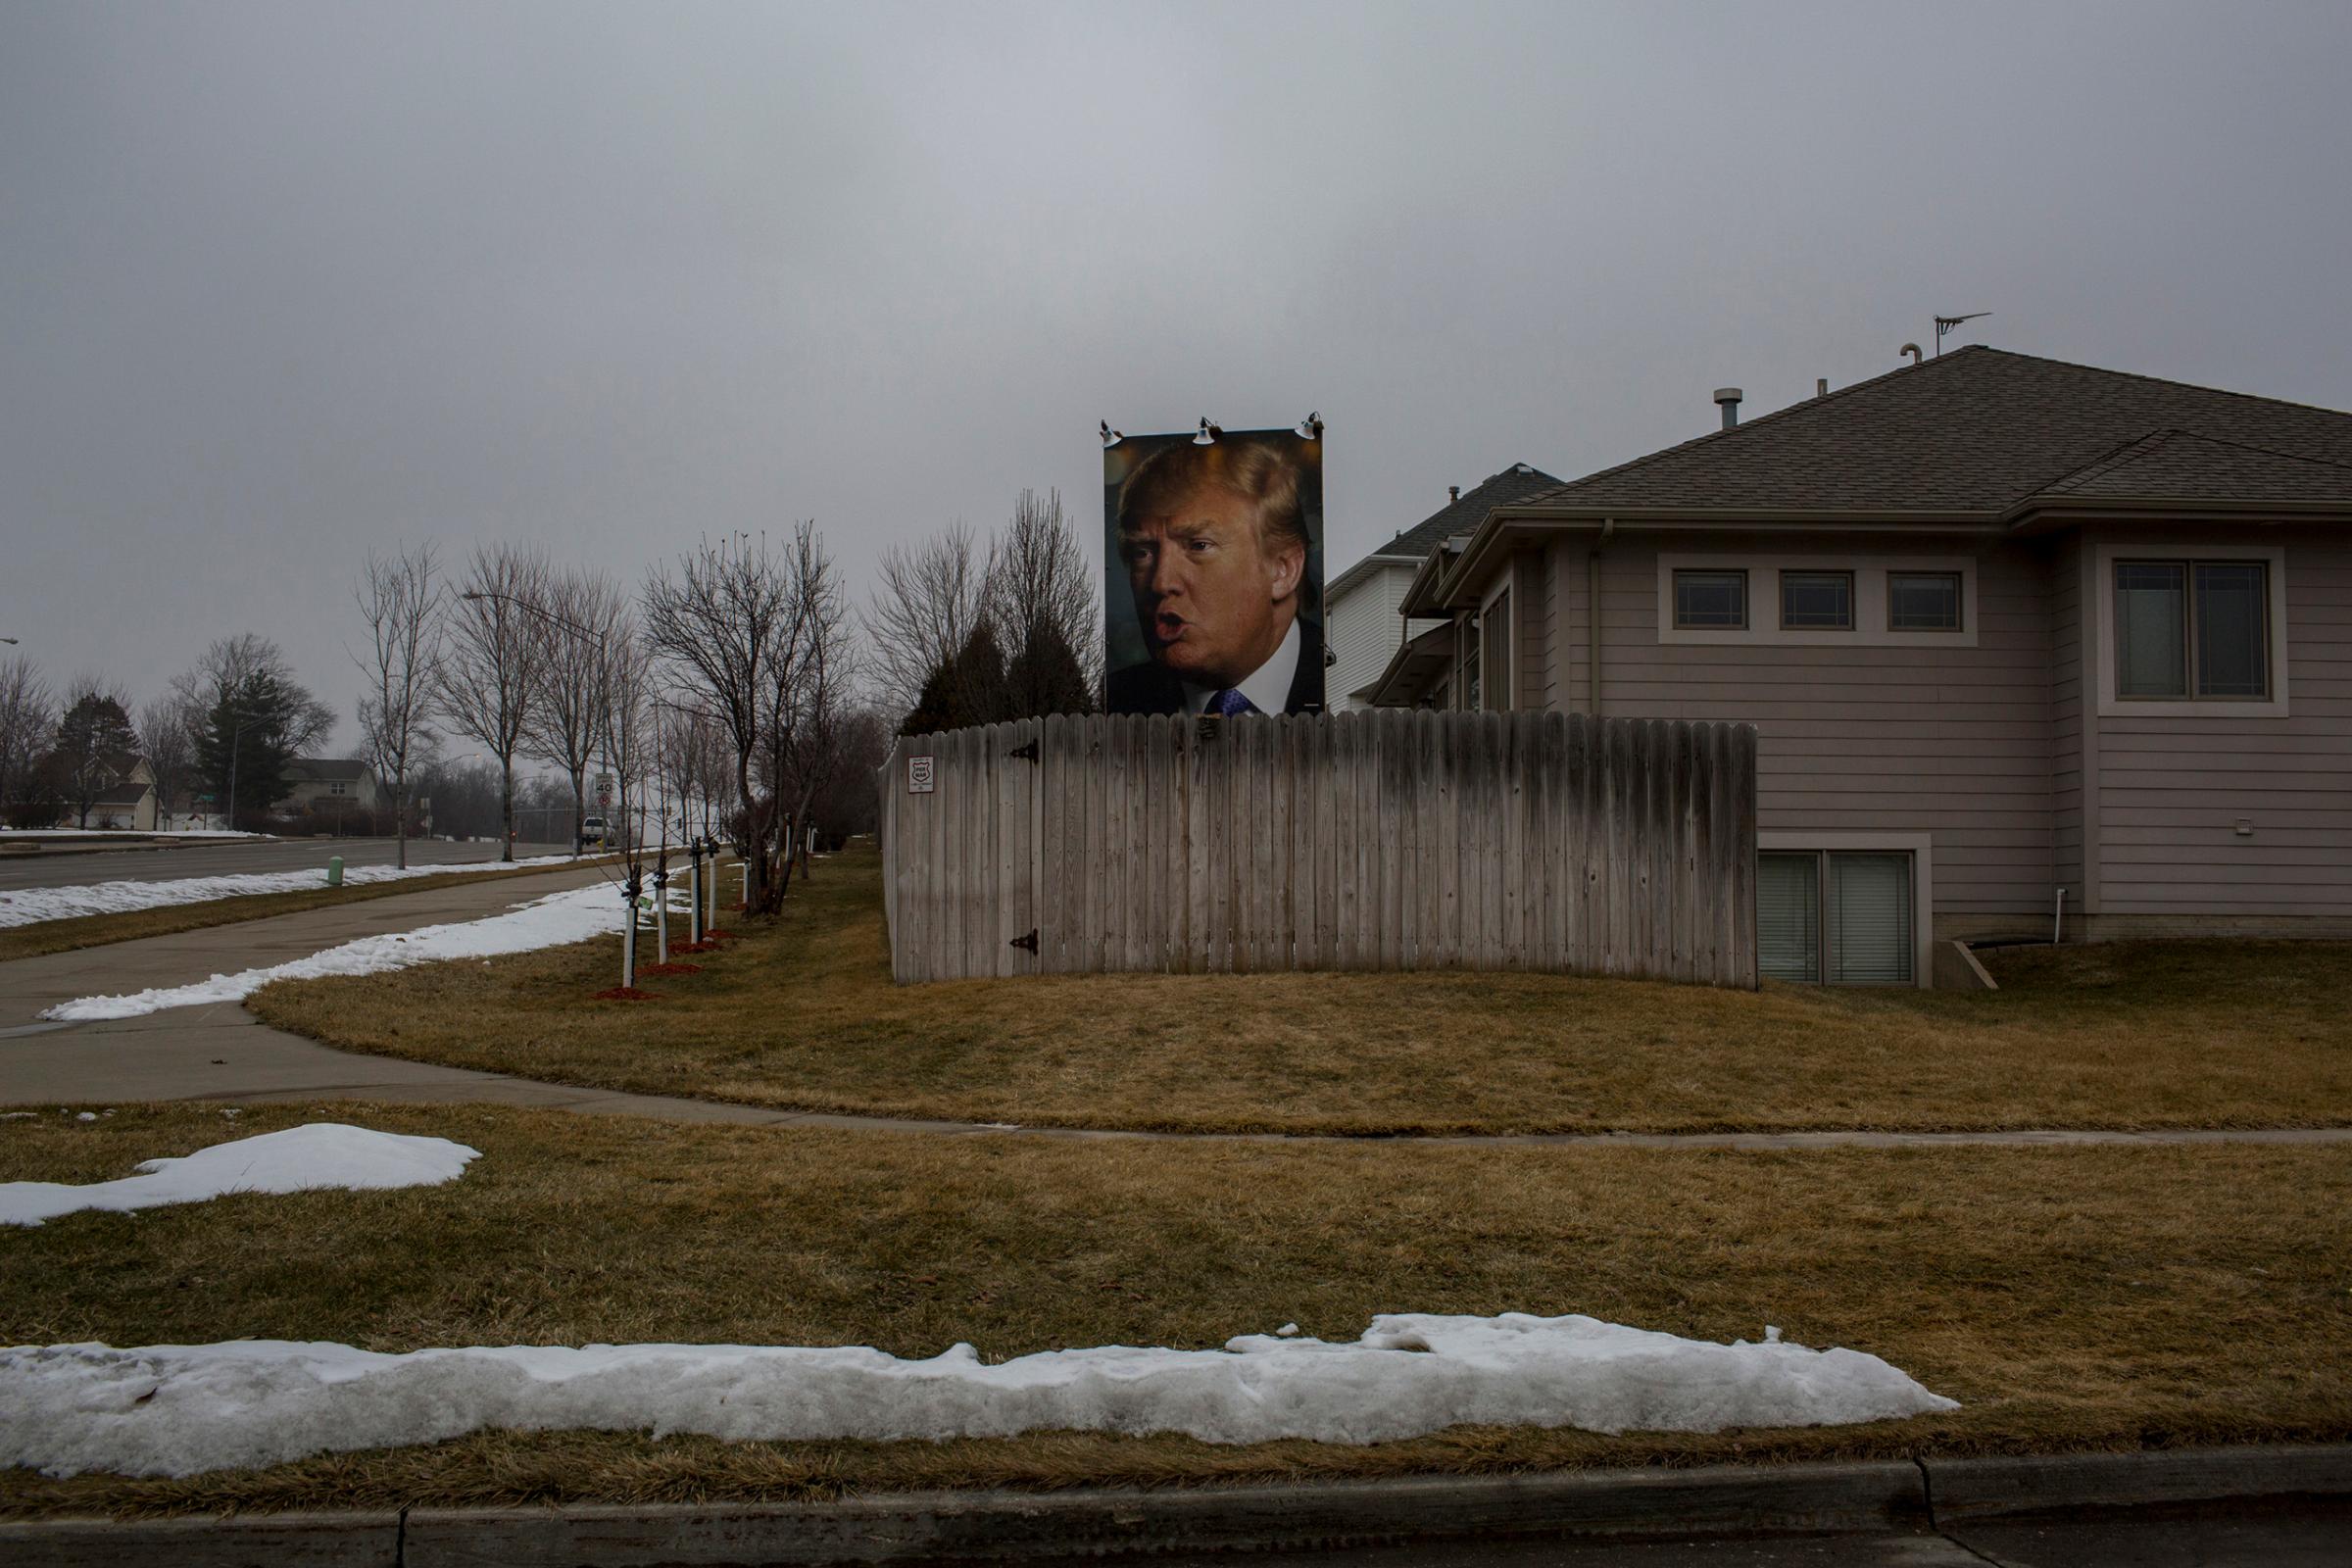 January 25, 2016. Des Moines Iowa. A picture of Donald Trumps face on a fence in West Des Moines. As Iowa's Caucuses approach, candidates converge on the state for campaign events. On Monday evening democratic candidates Clinton, O'Malley and Sanders held a Town Hall sponsored by CCN at Drake University in Des Moines. (Natalie Keyssar)